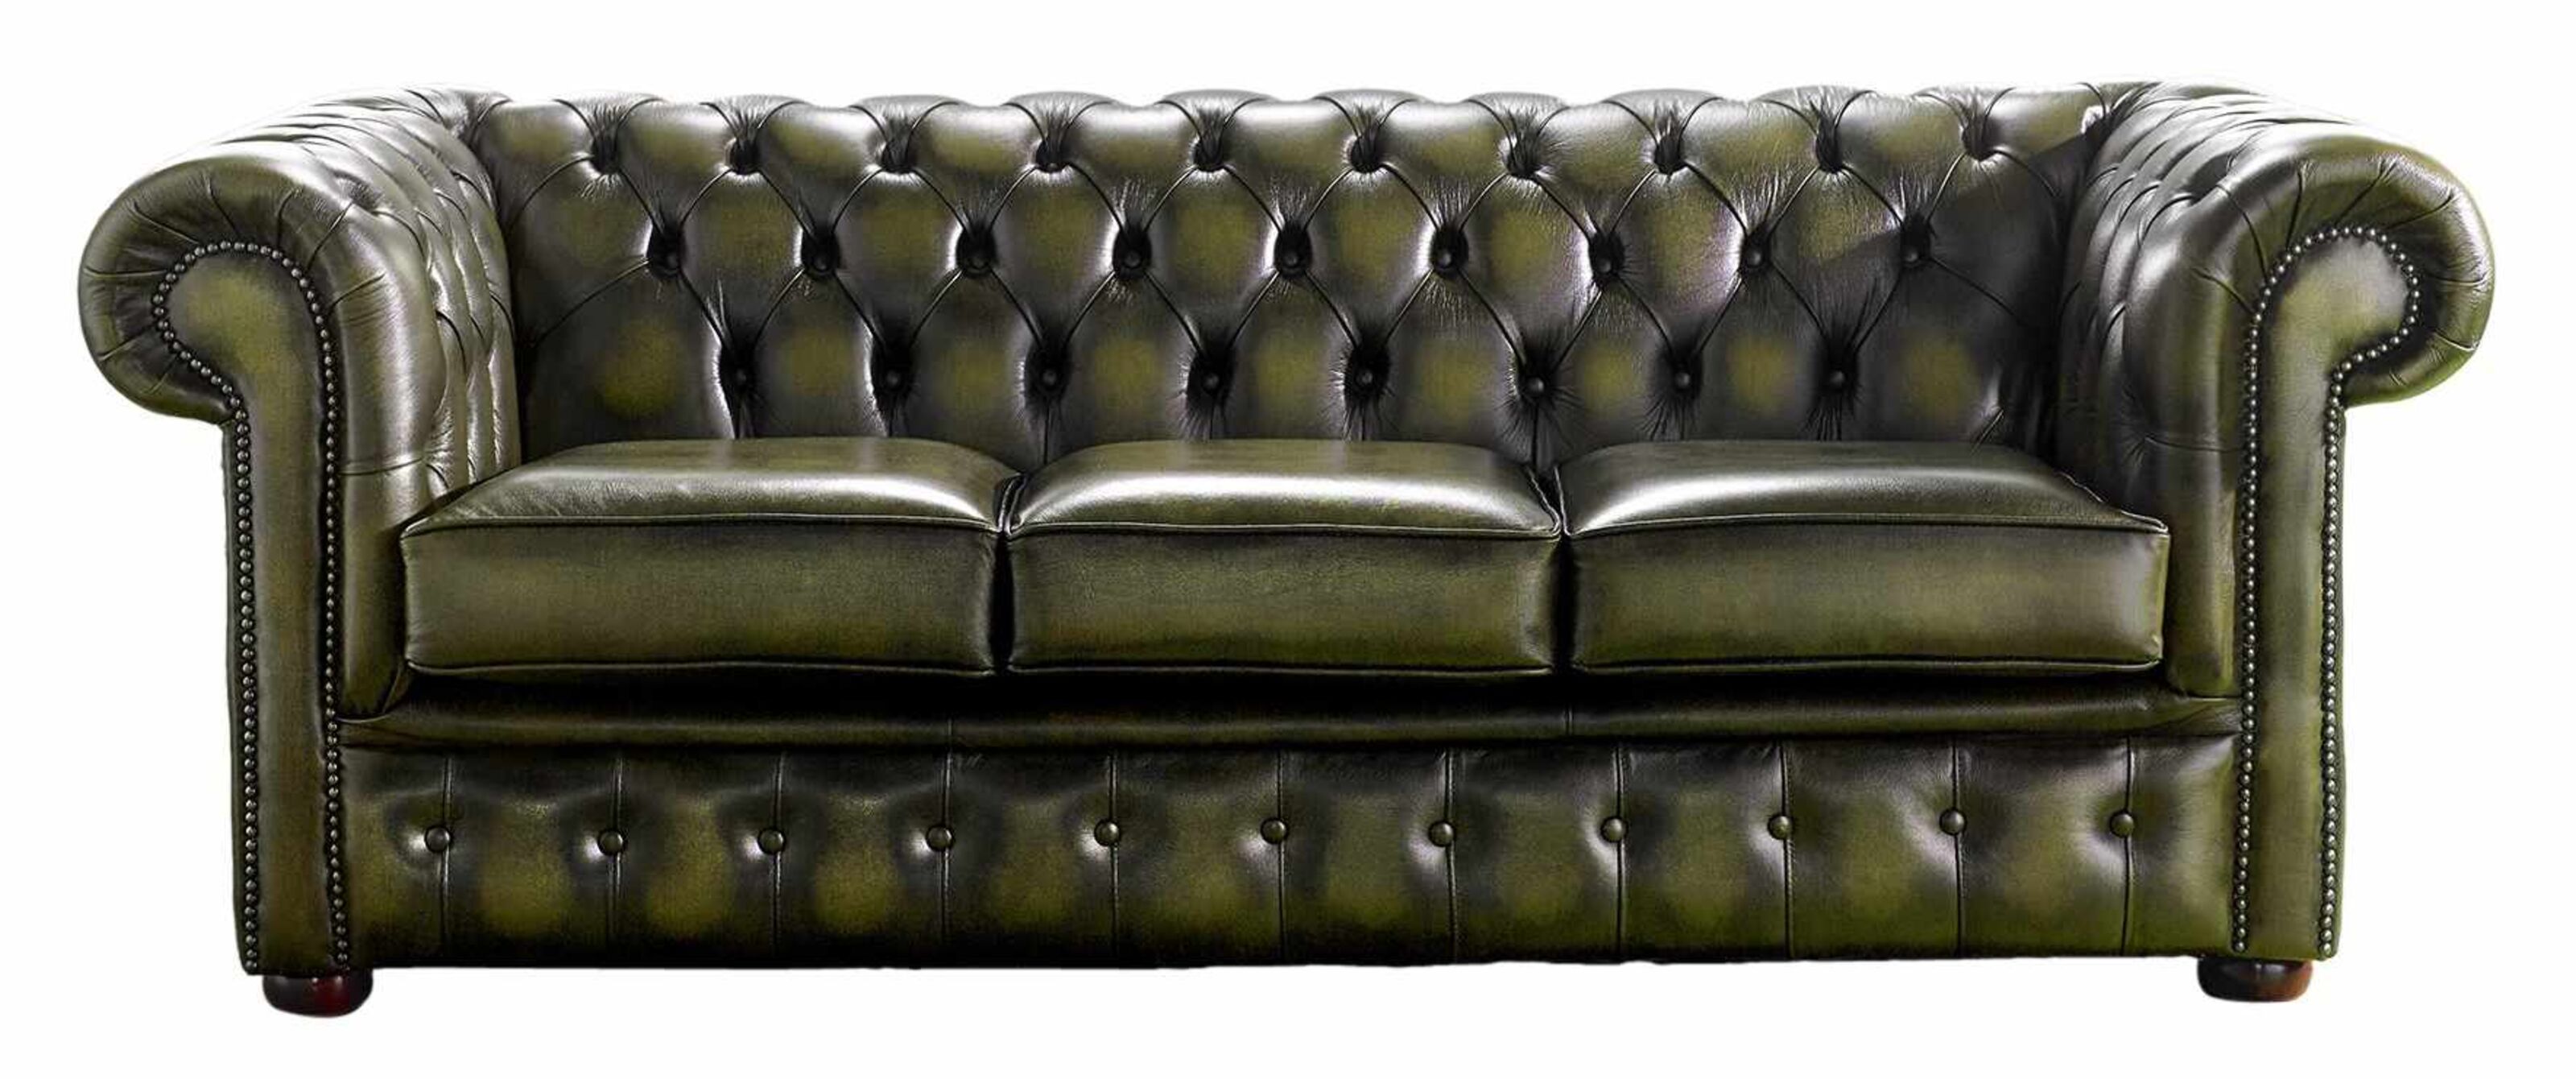 Are Chesterfield Sofas Made In Chesterfield?  %Post Title